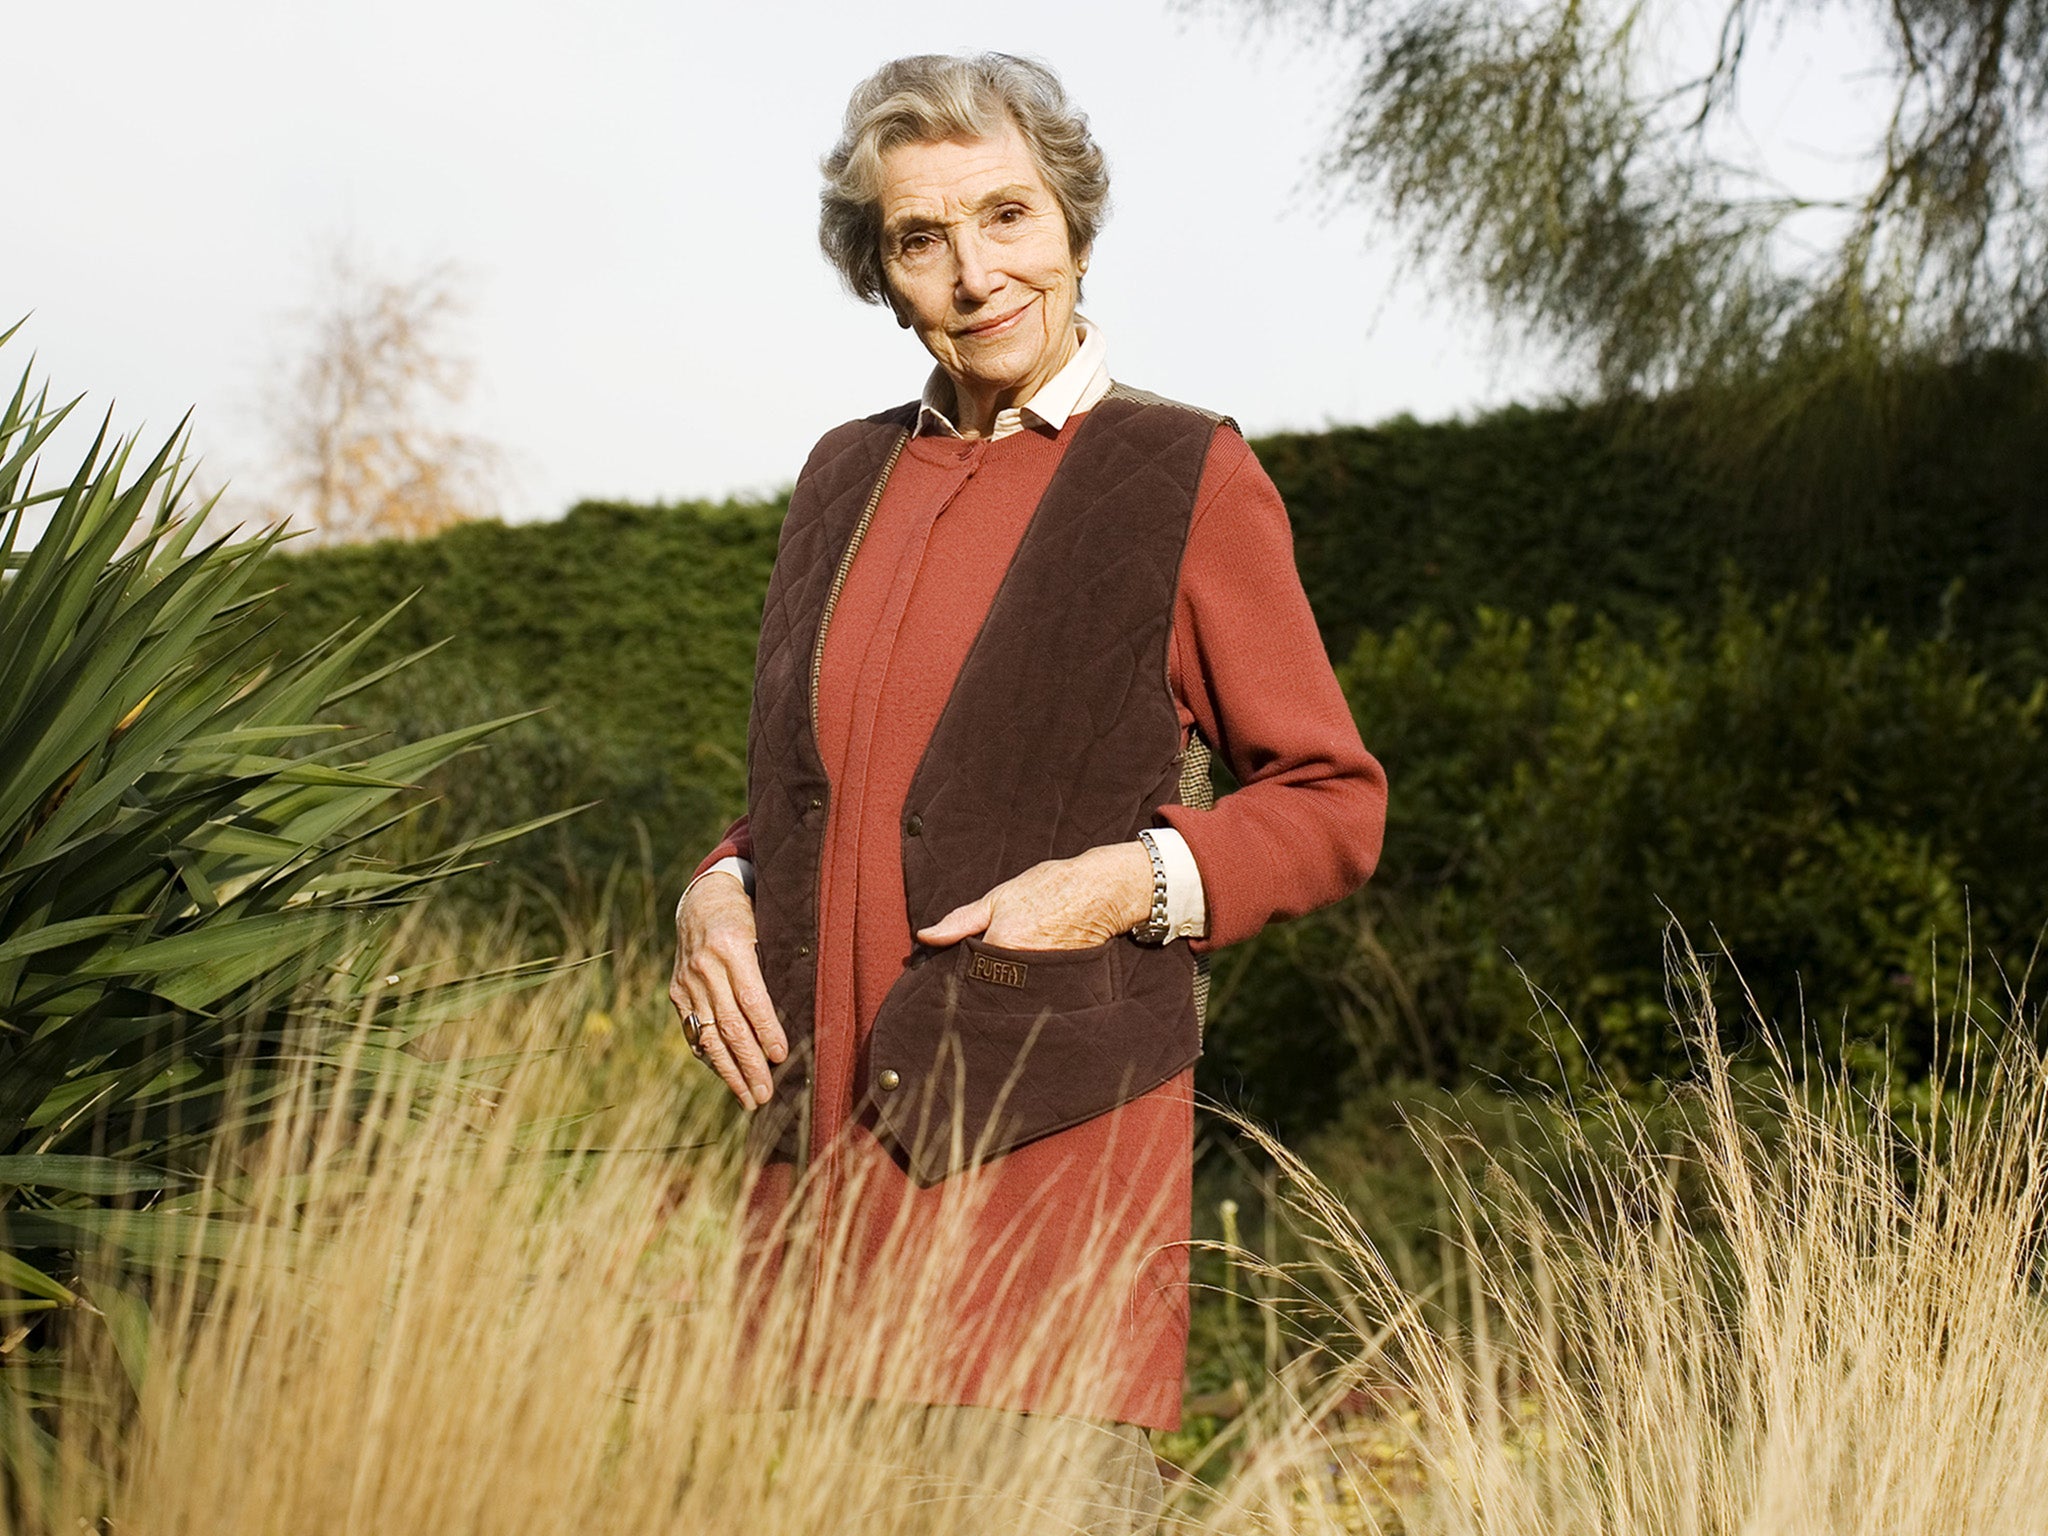 Chatto in her garden in 2008: ‘I’m interested in harmony in foliage, in making things flow’